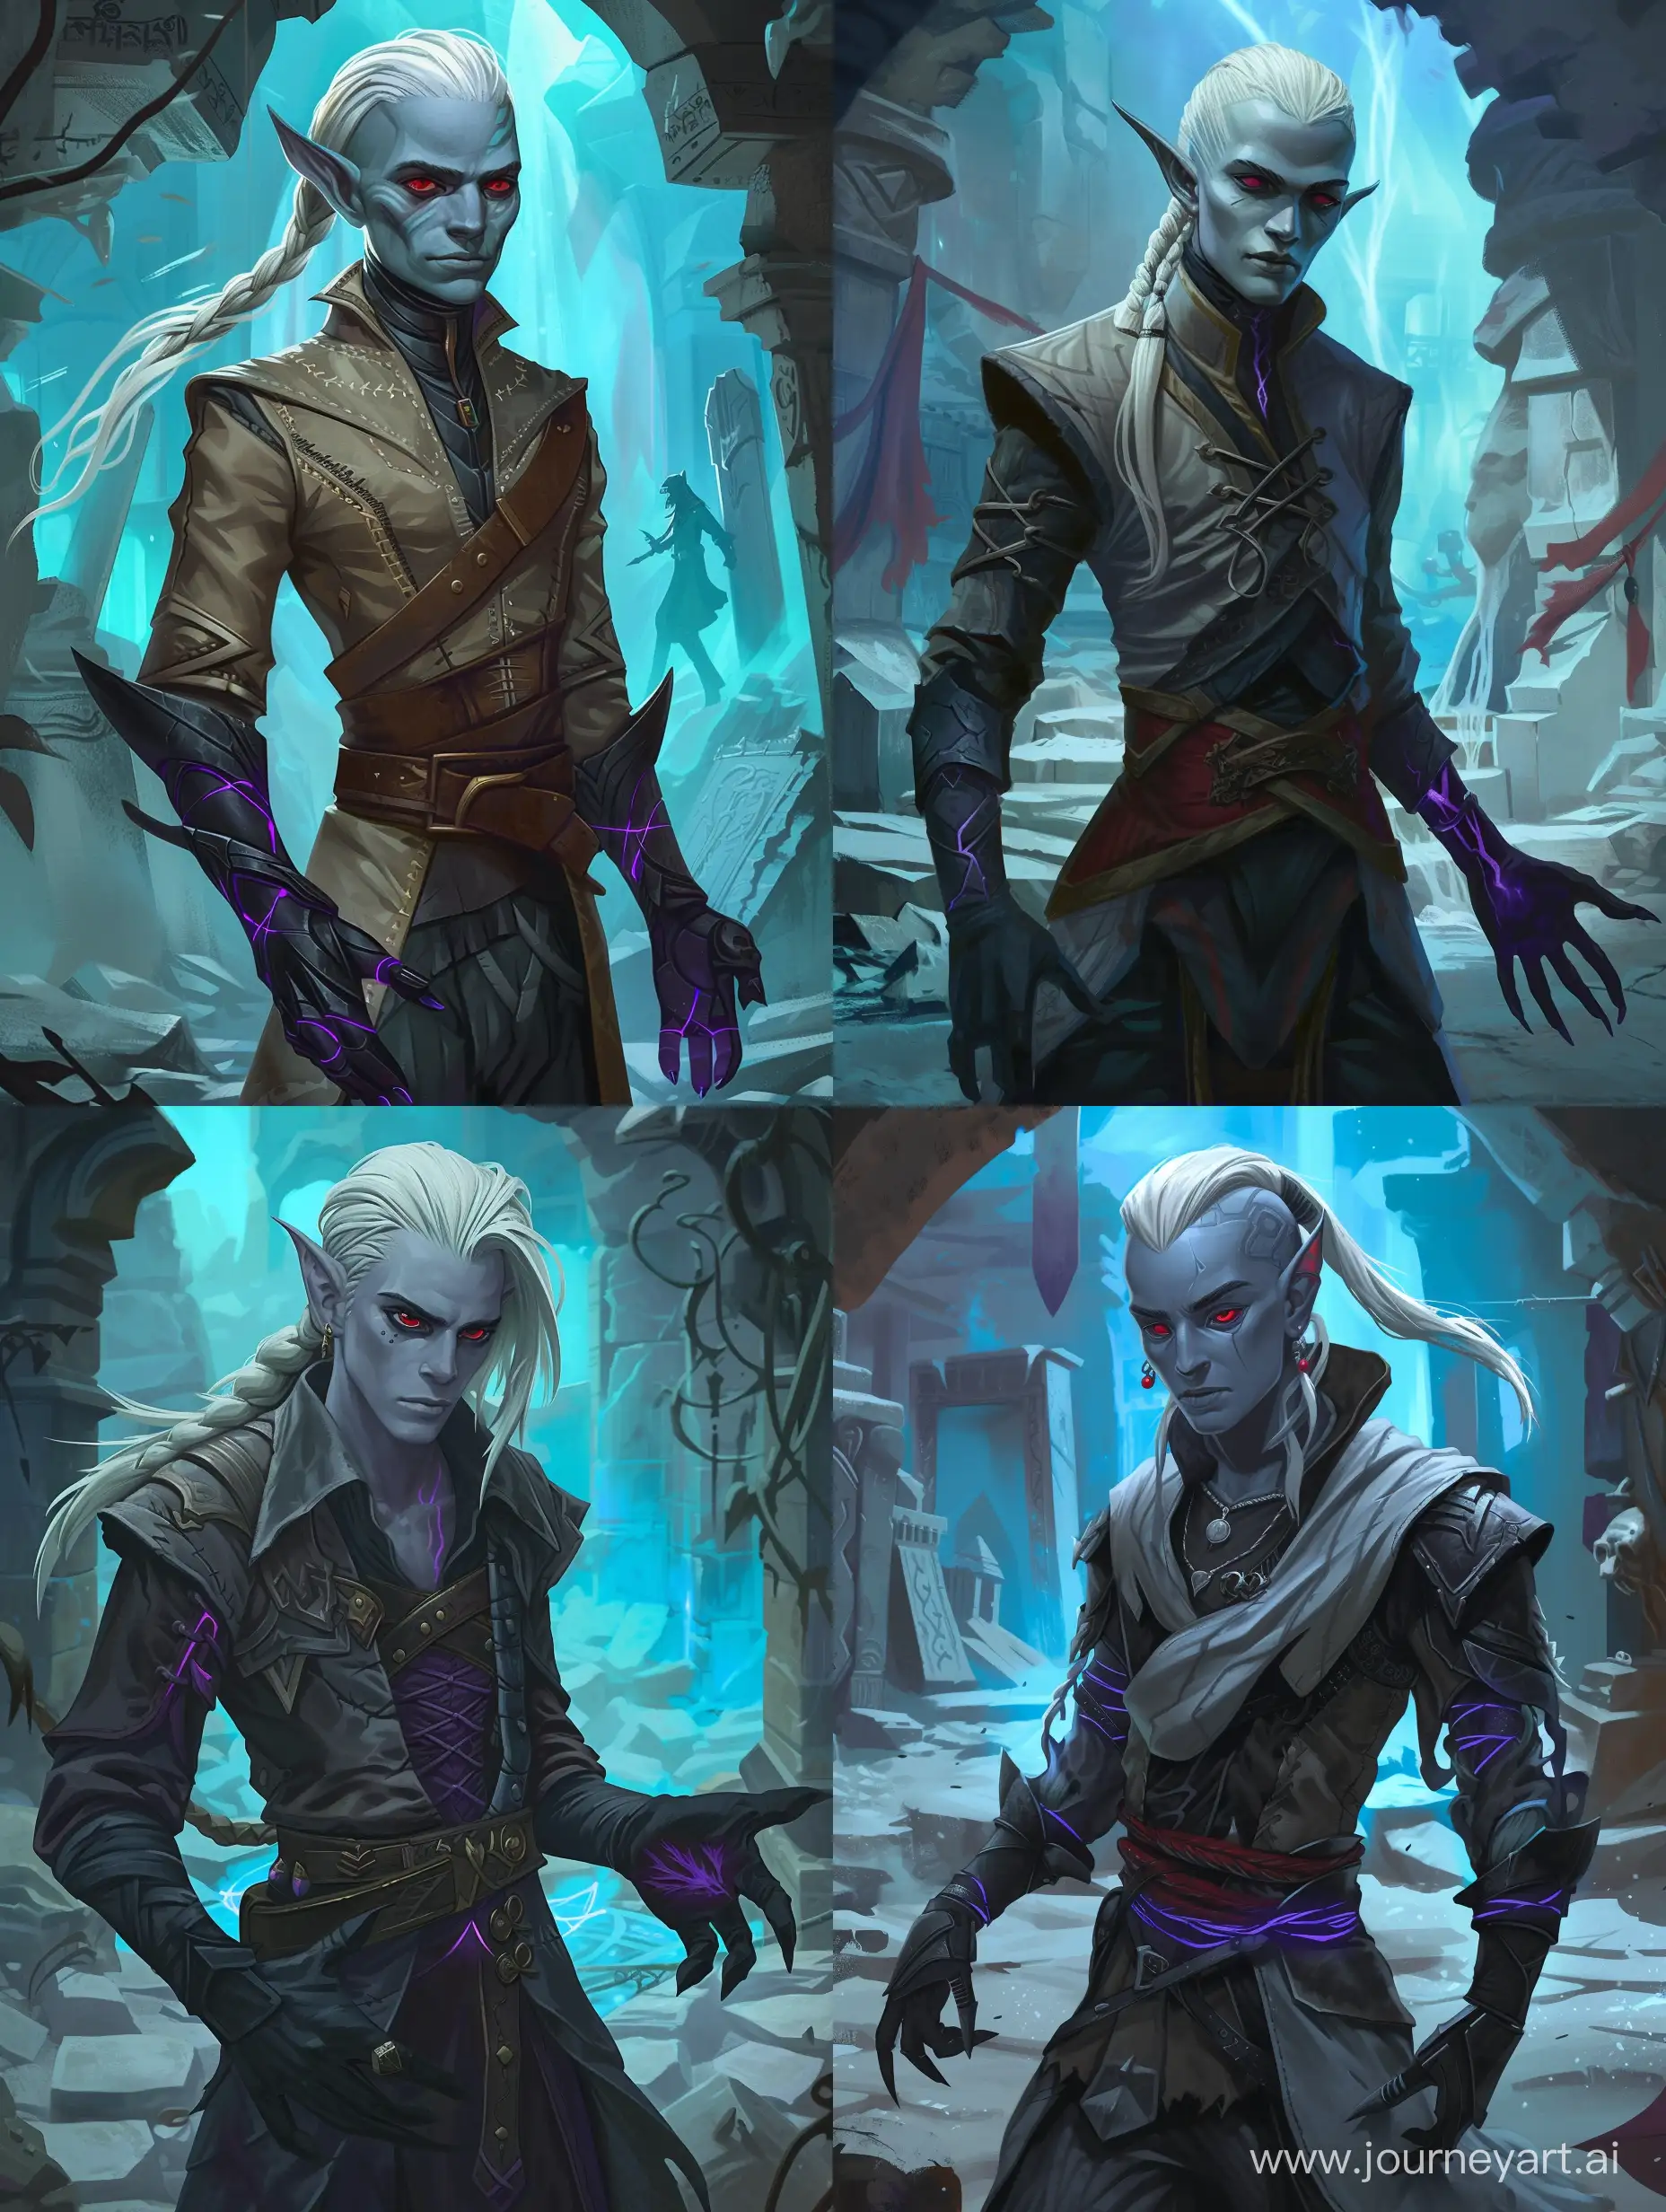 Draw a character from the Dungeons and Dragons universe according to the following description: He is a young drow rogue, dressed in assassin clothes. His swept back white hair is gathered in a long braid, his face is clean shaven and his eyes have red iris. He has grey skin. His black hands have purple veins and black claws. His demeanor is calm. He is standing in ruins of an underground temple, magic blue light in the background